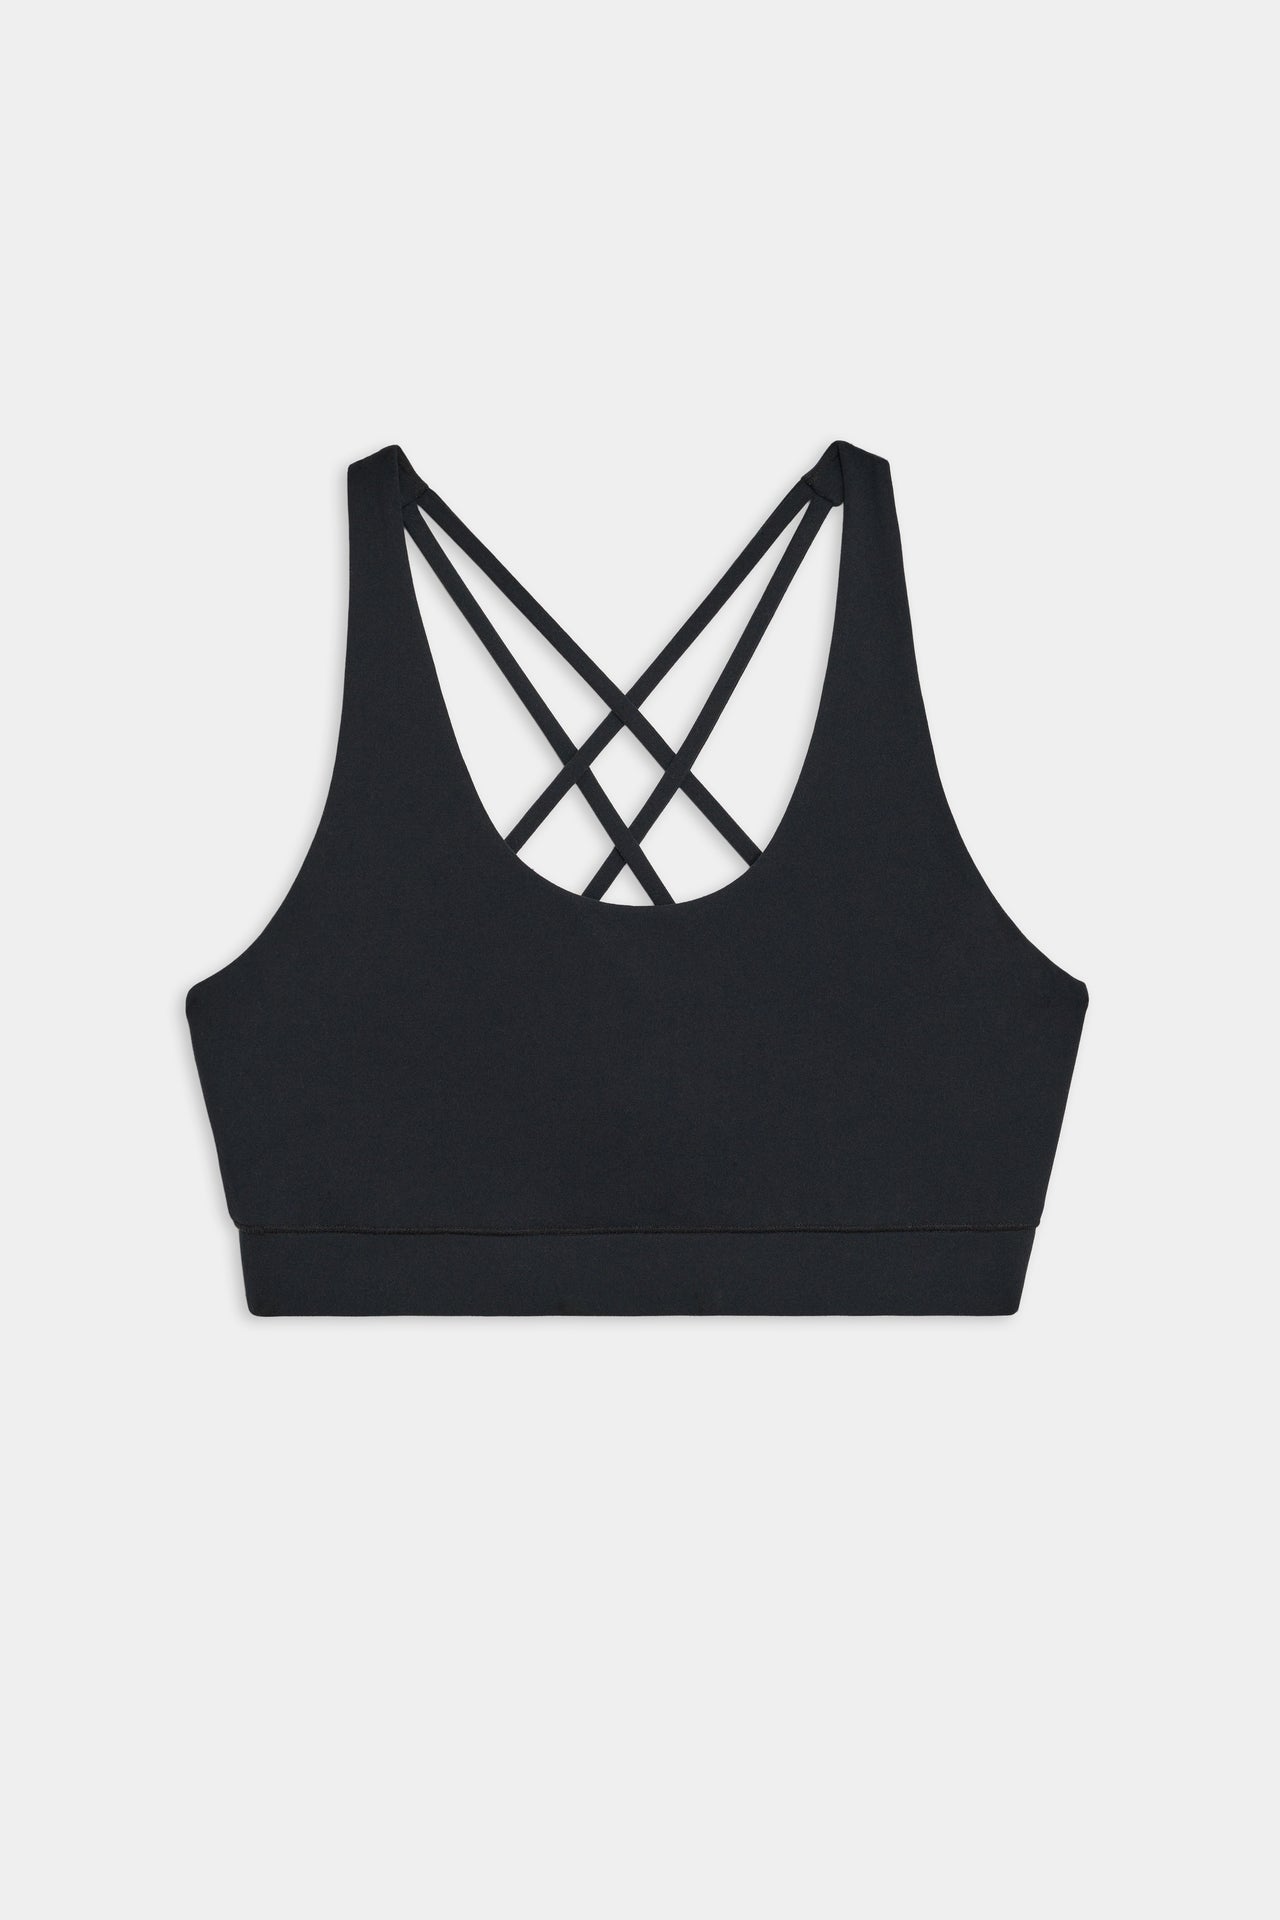 Flat view of black sports bra with thick straps and crisscrossed spaghetti straps